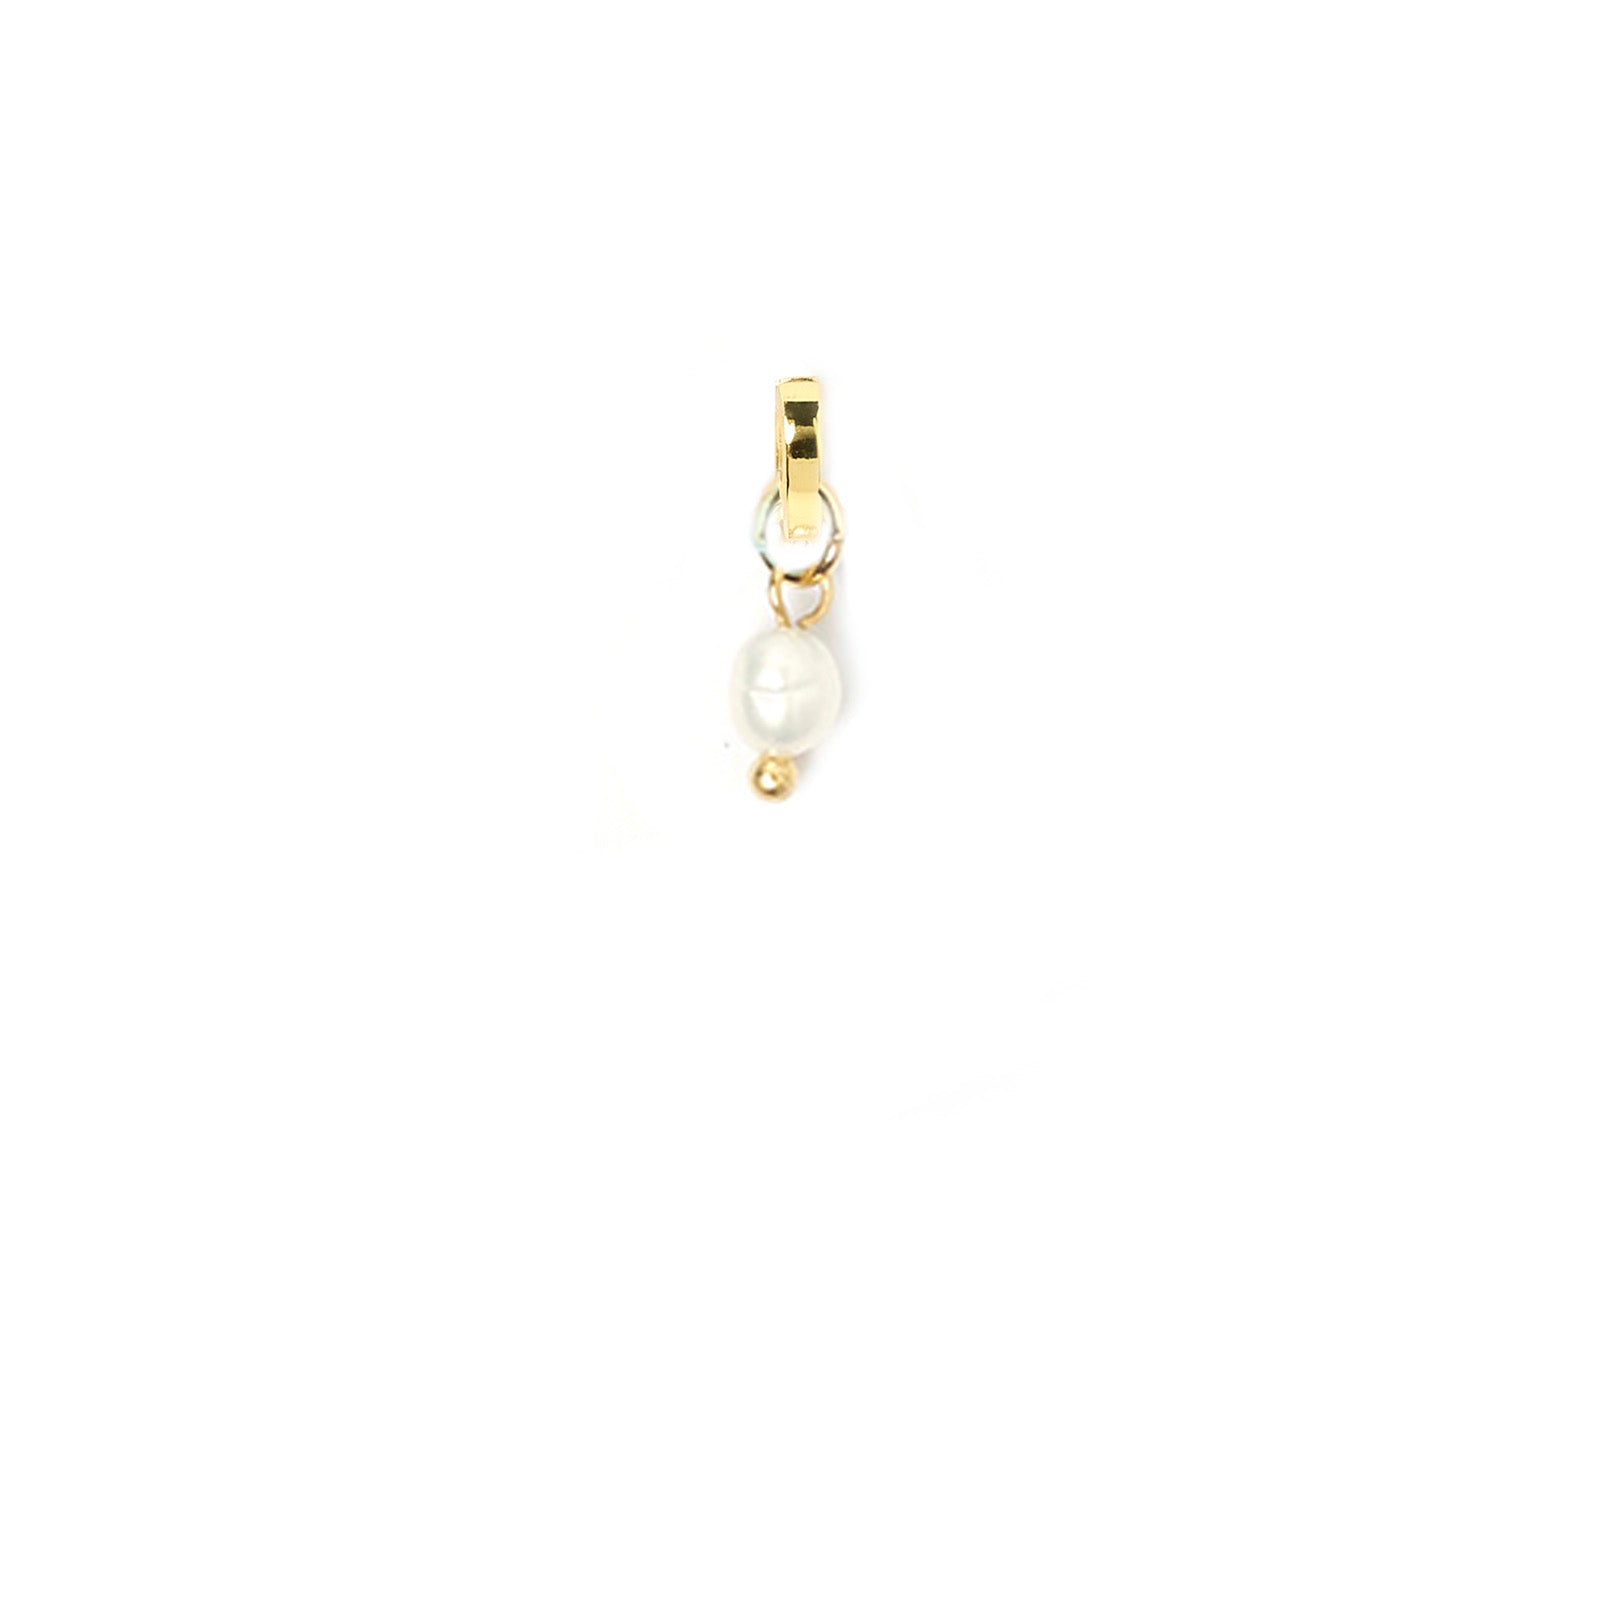 Arms Of Eve delicate Paige pearl charm featuring white pearl, perfect for adding elegance to any outfit